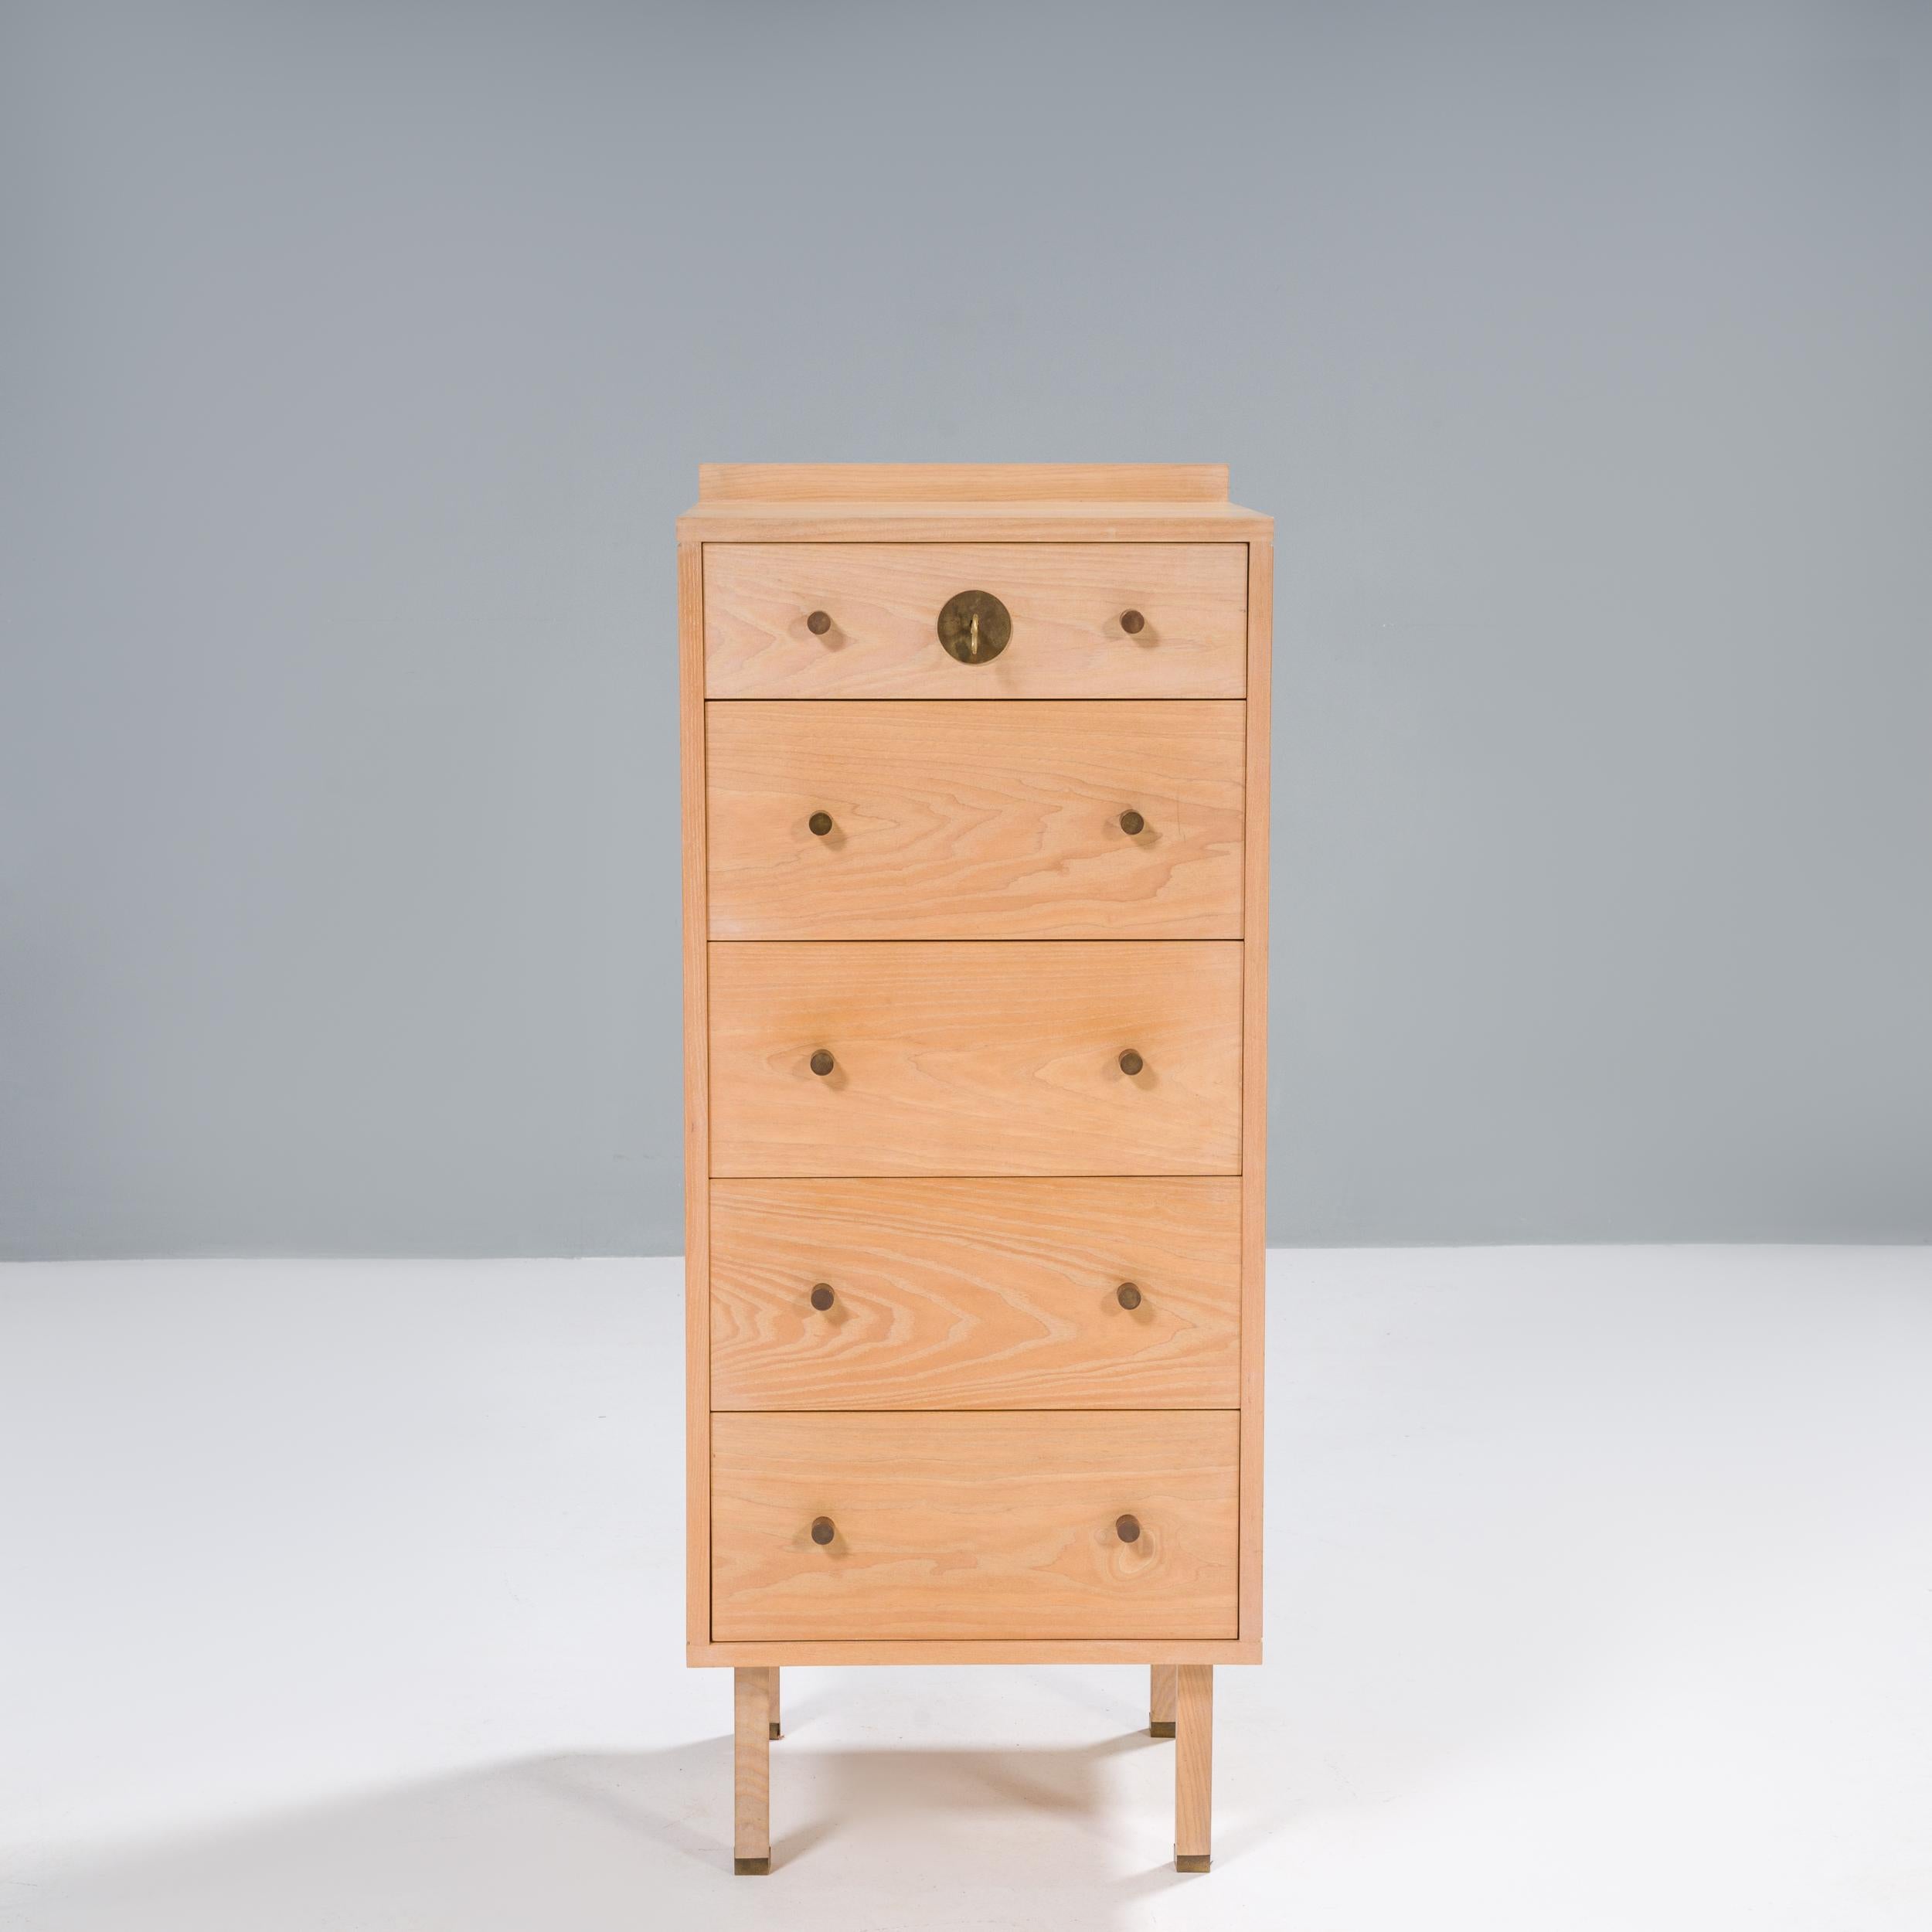 Founded in 2010, Another Country specialises in wooden furniture. The Tallboy Two was constructed in their Portugal workshop from sold certified ash wood.

The tallboy storage offers a contemporary update on the traditional design with a white oil